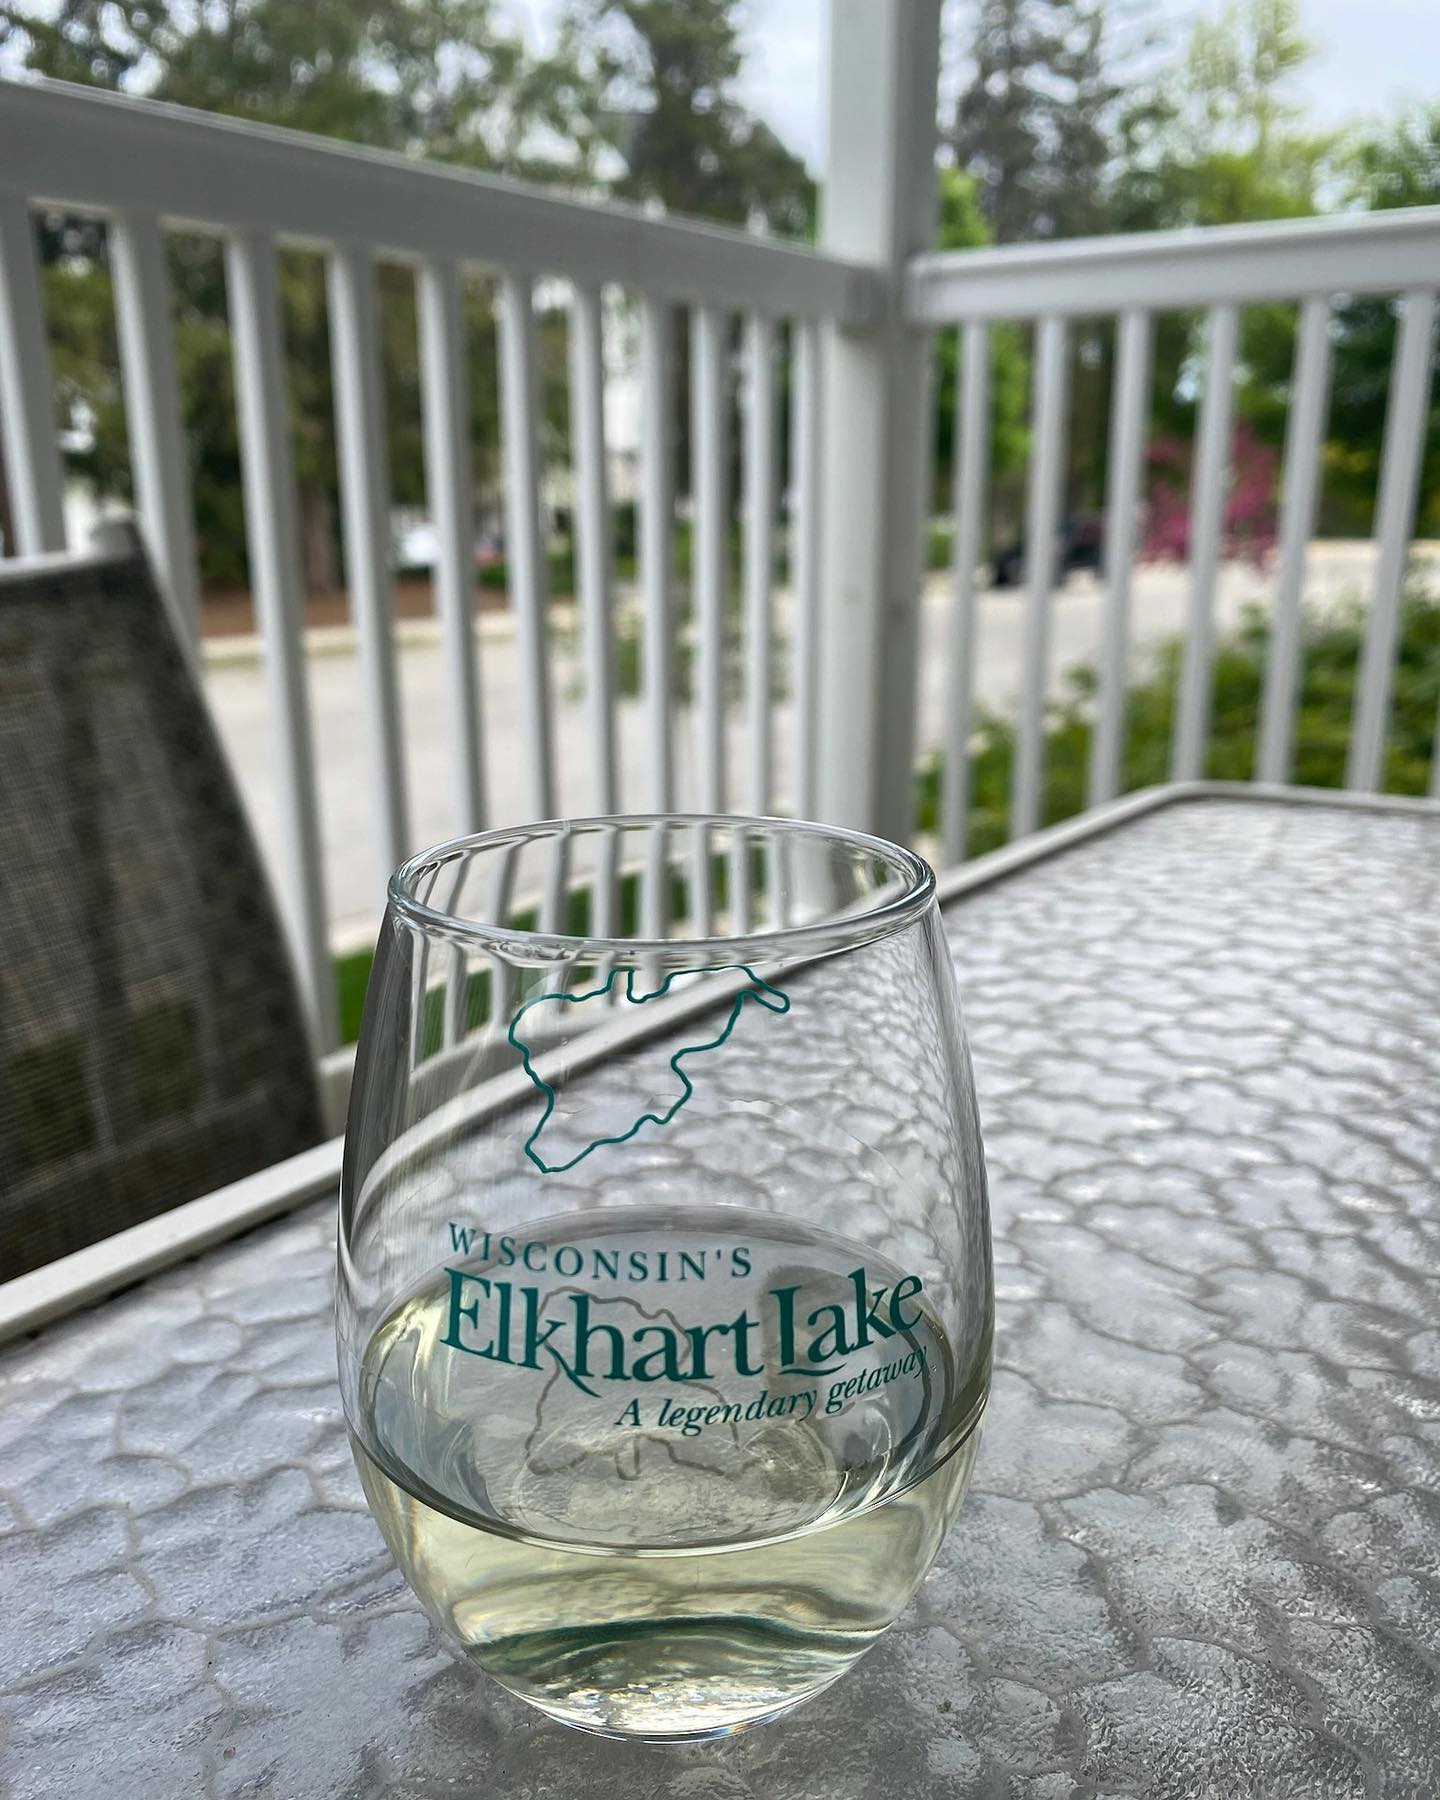 Cheers from @elkhartlake 🤩 Where are you spending Memorial Day Weekend?